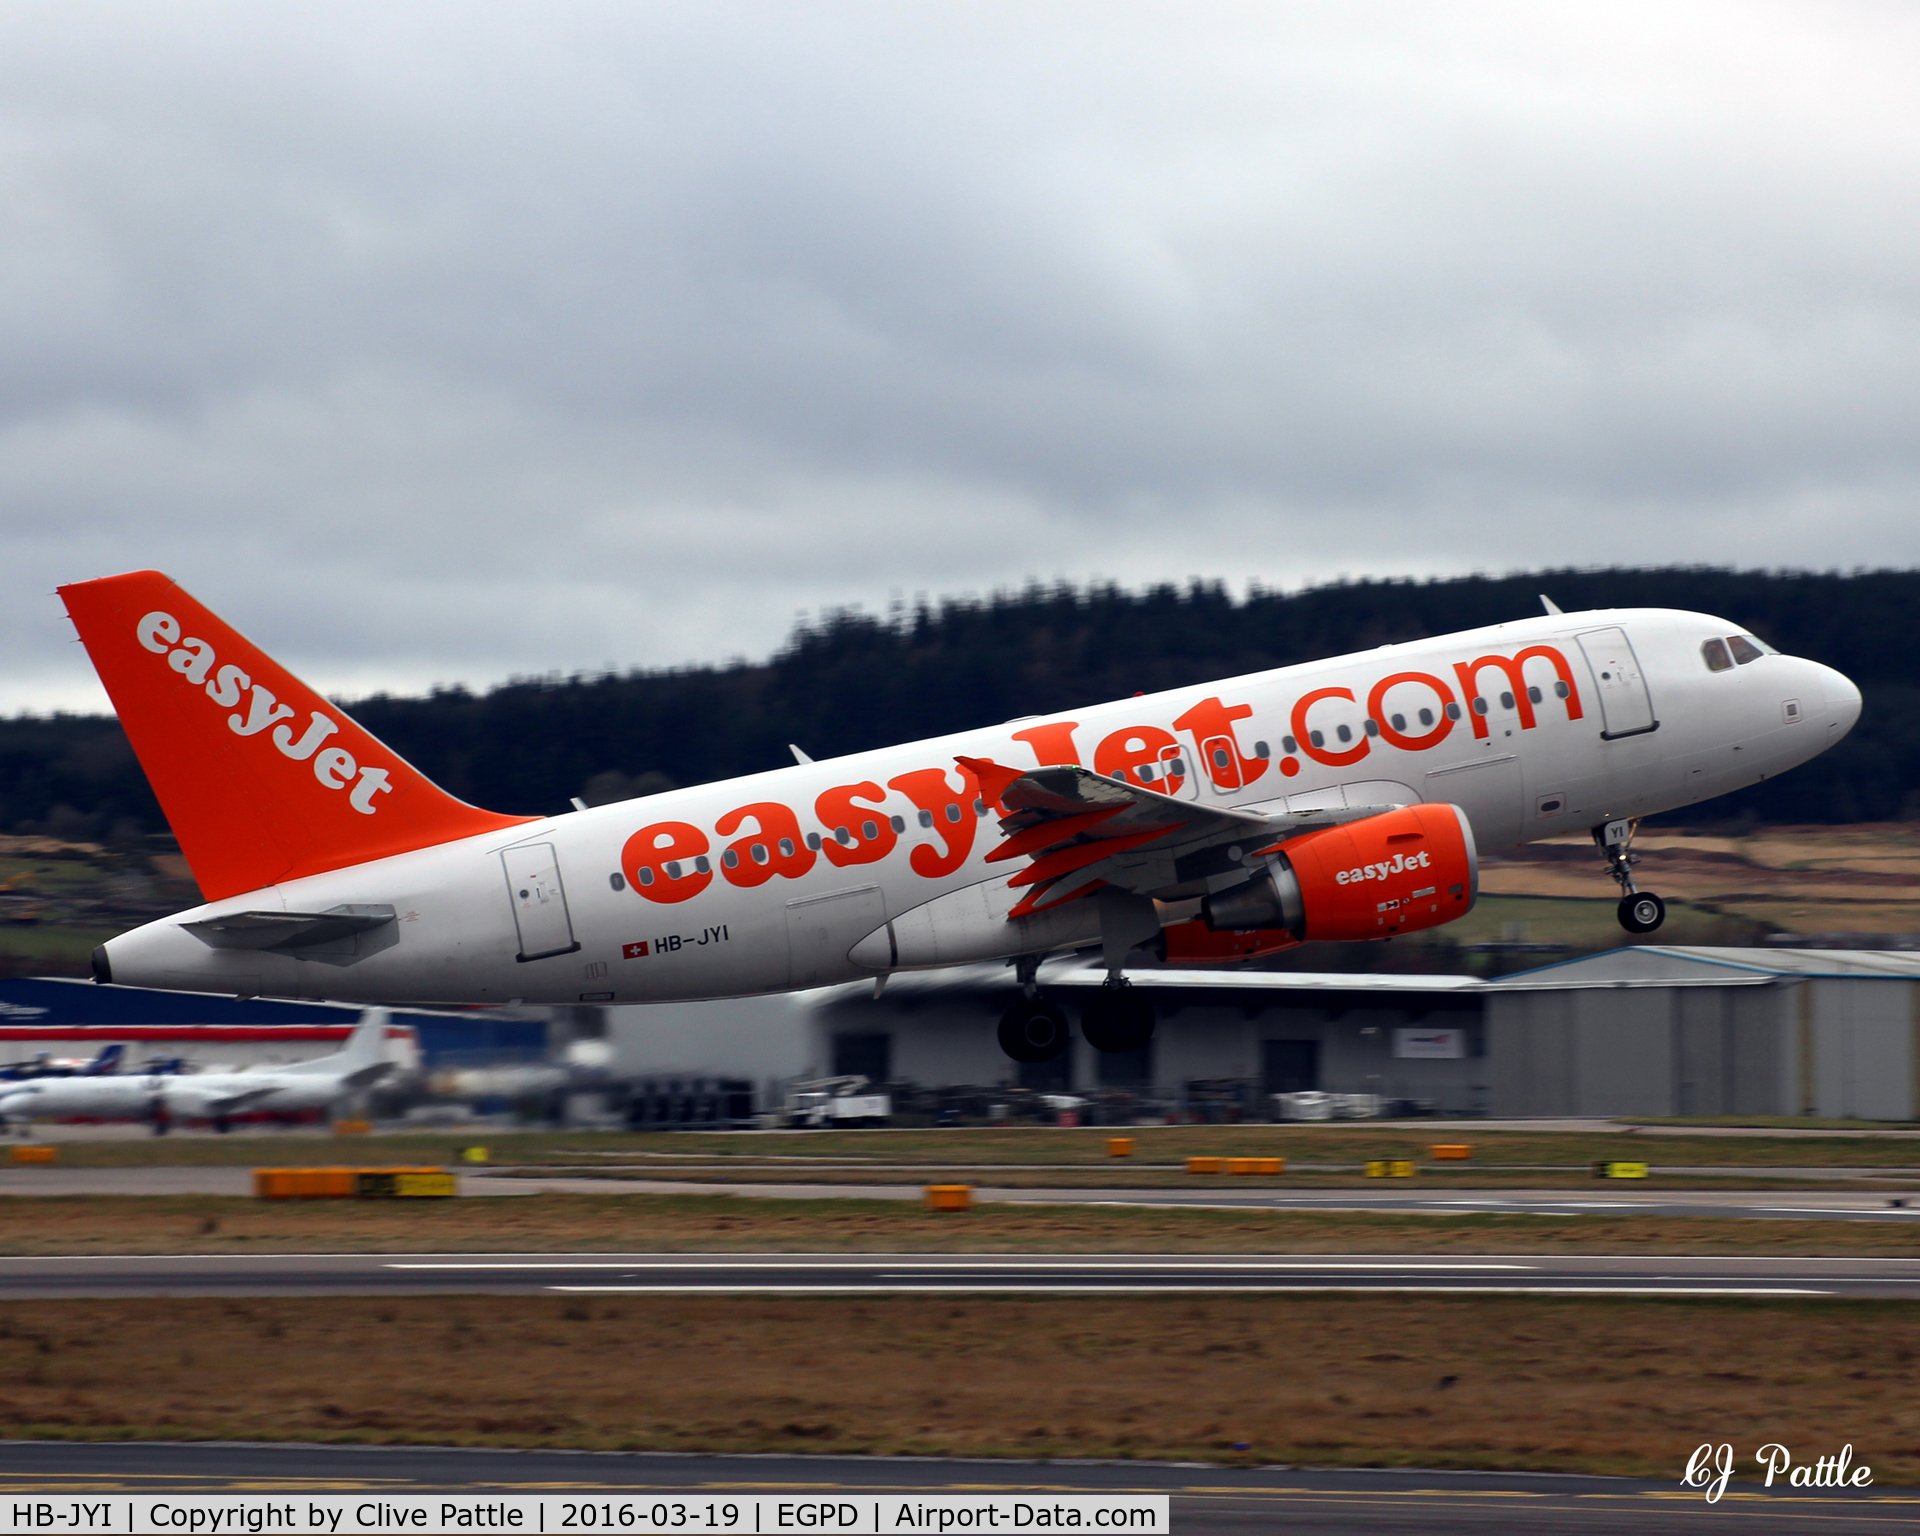 HB-JYI, 2011 Airbus A319-111 C/N 4744, Take off action at Aberdeen EGPD on the Saturday weekly flt from/to Geneva